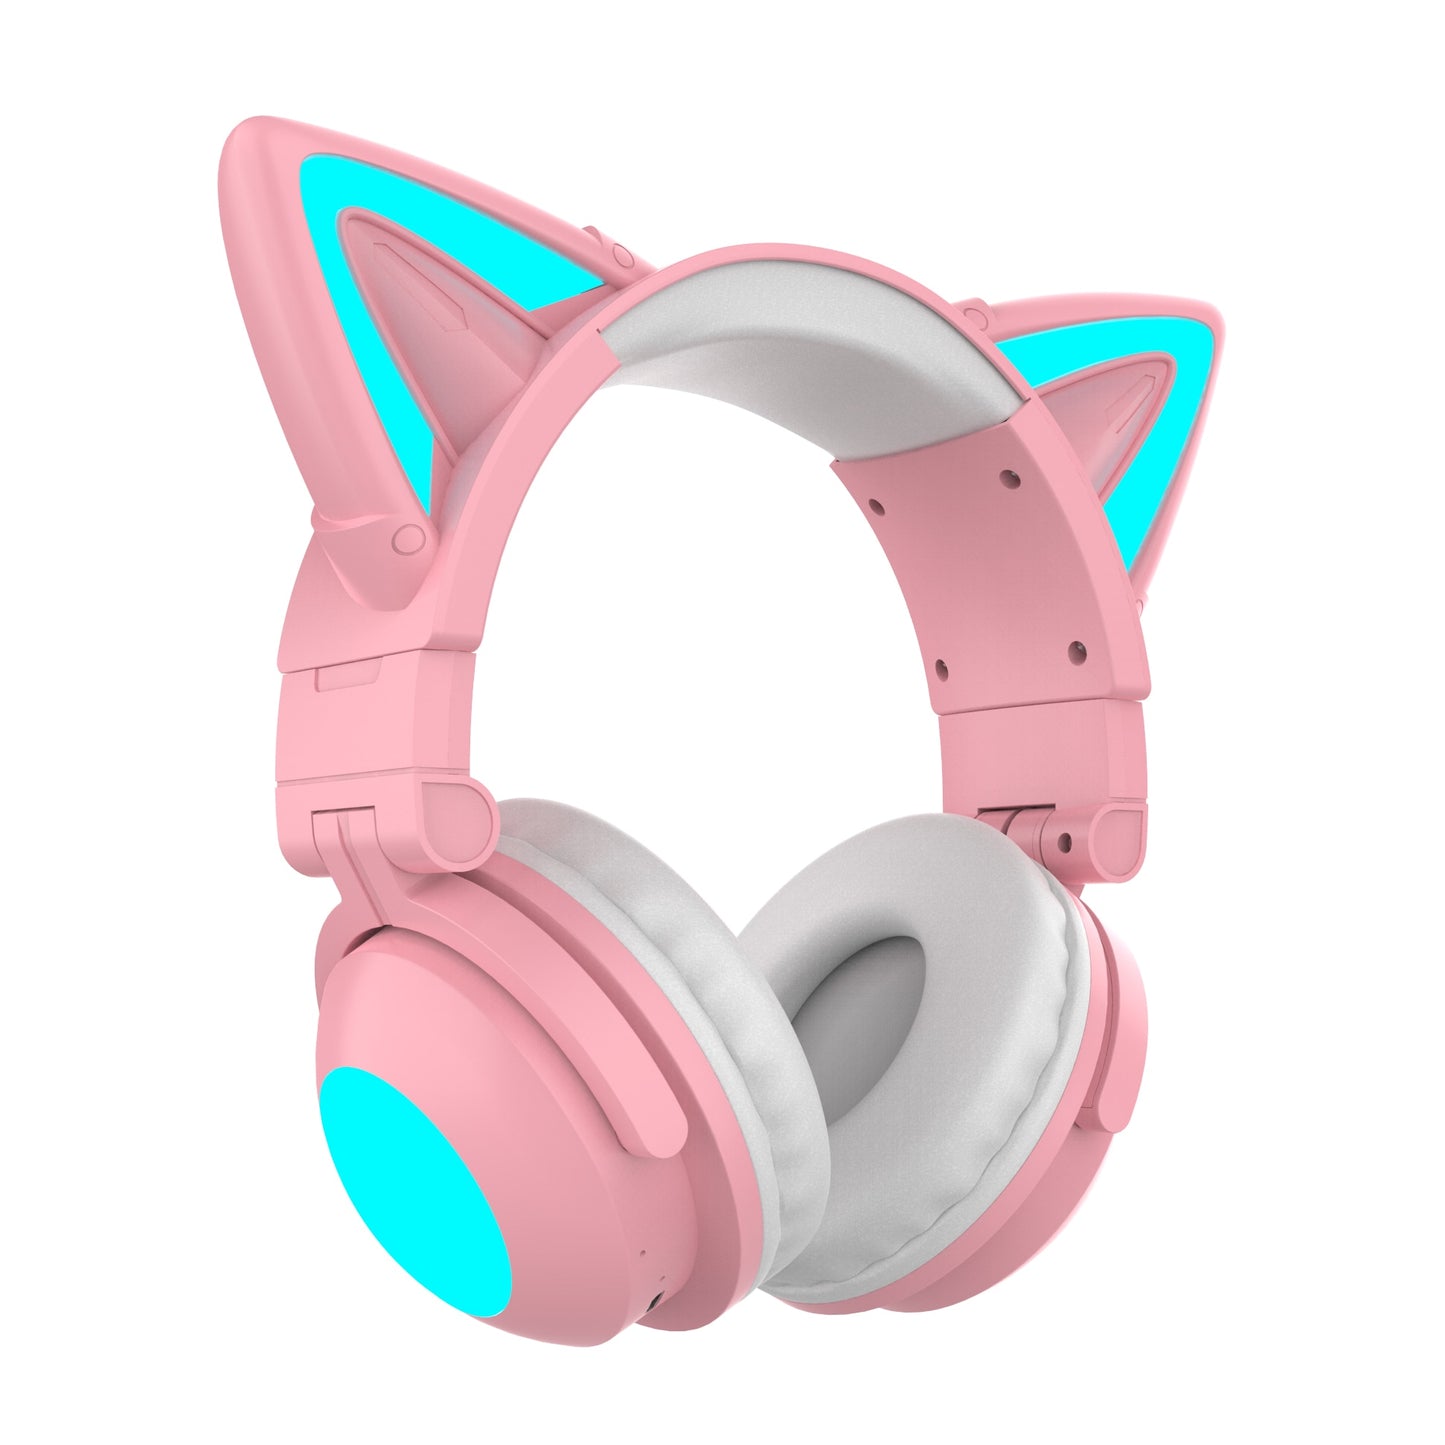 RGB Cute Cat Wireless Headphones with Microphone 7.1 Stereo Music